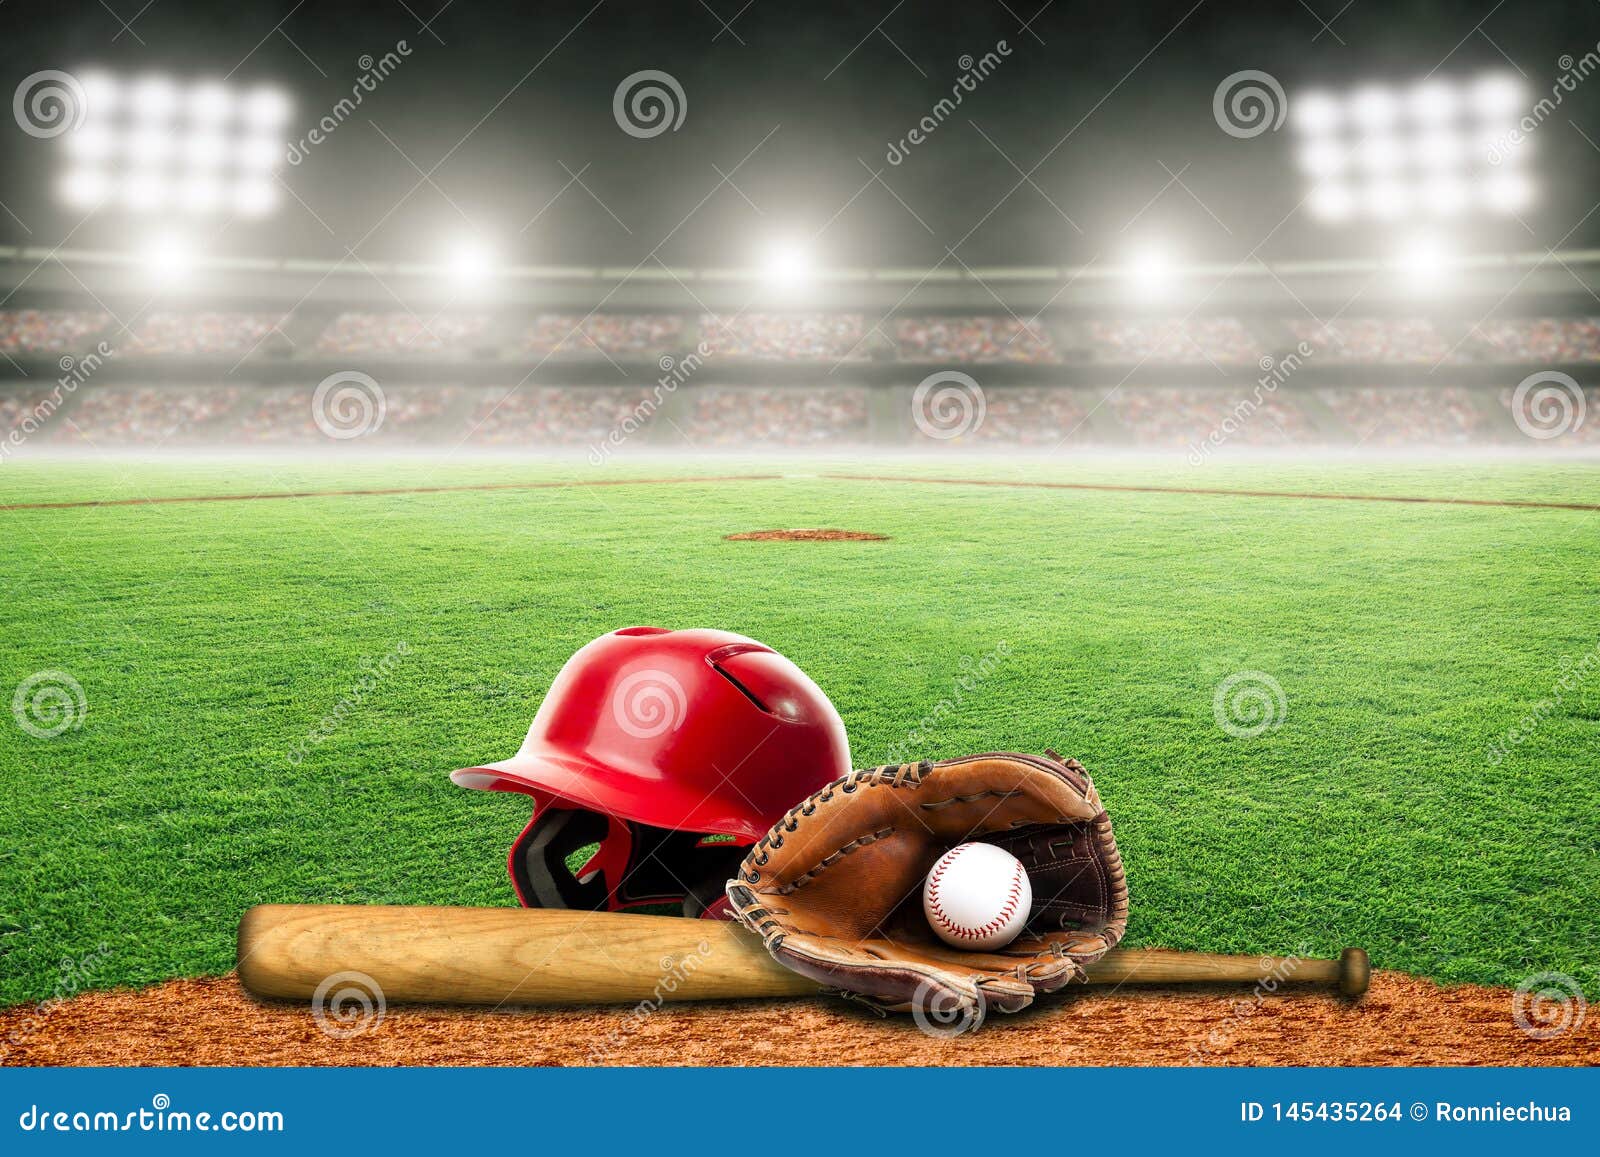 baseball bat, helmet, glove and ball on field in outdoor stadium with copy space